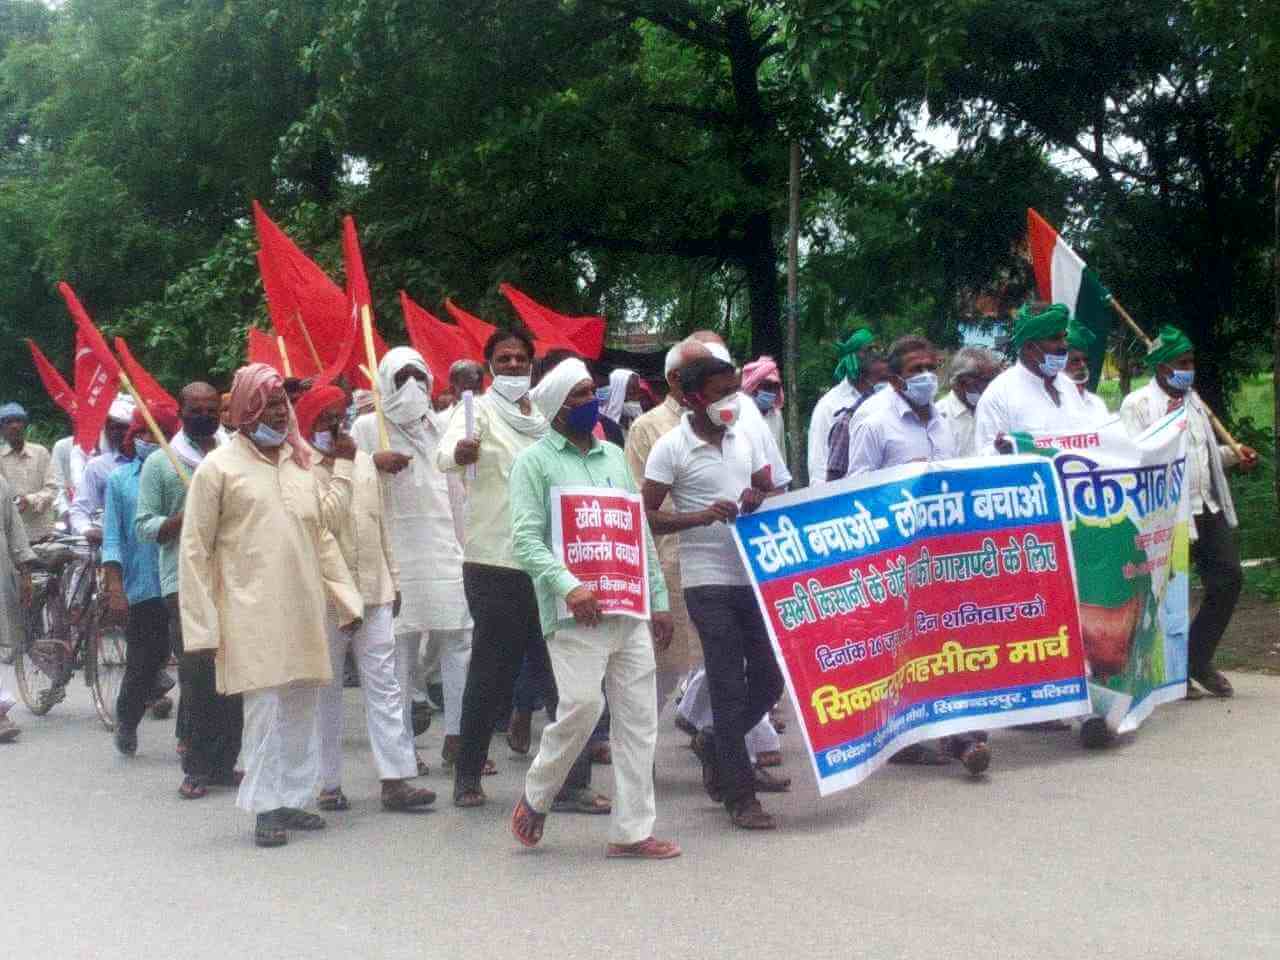 Left Parties Come Out to Save Farming, Democracy